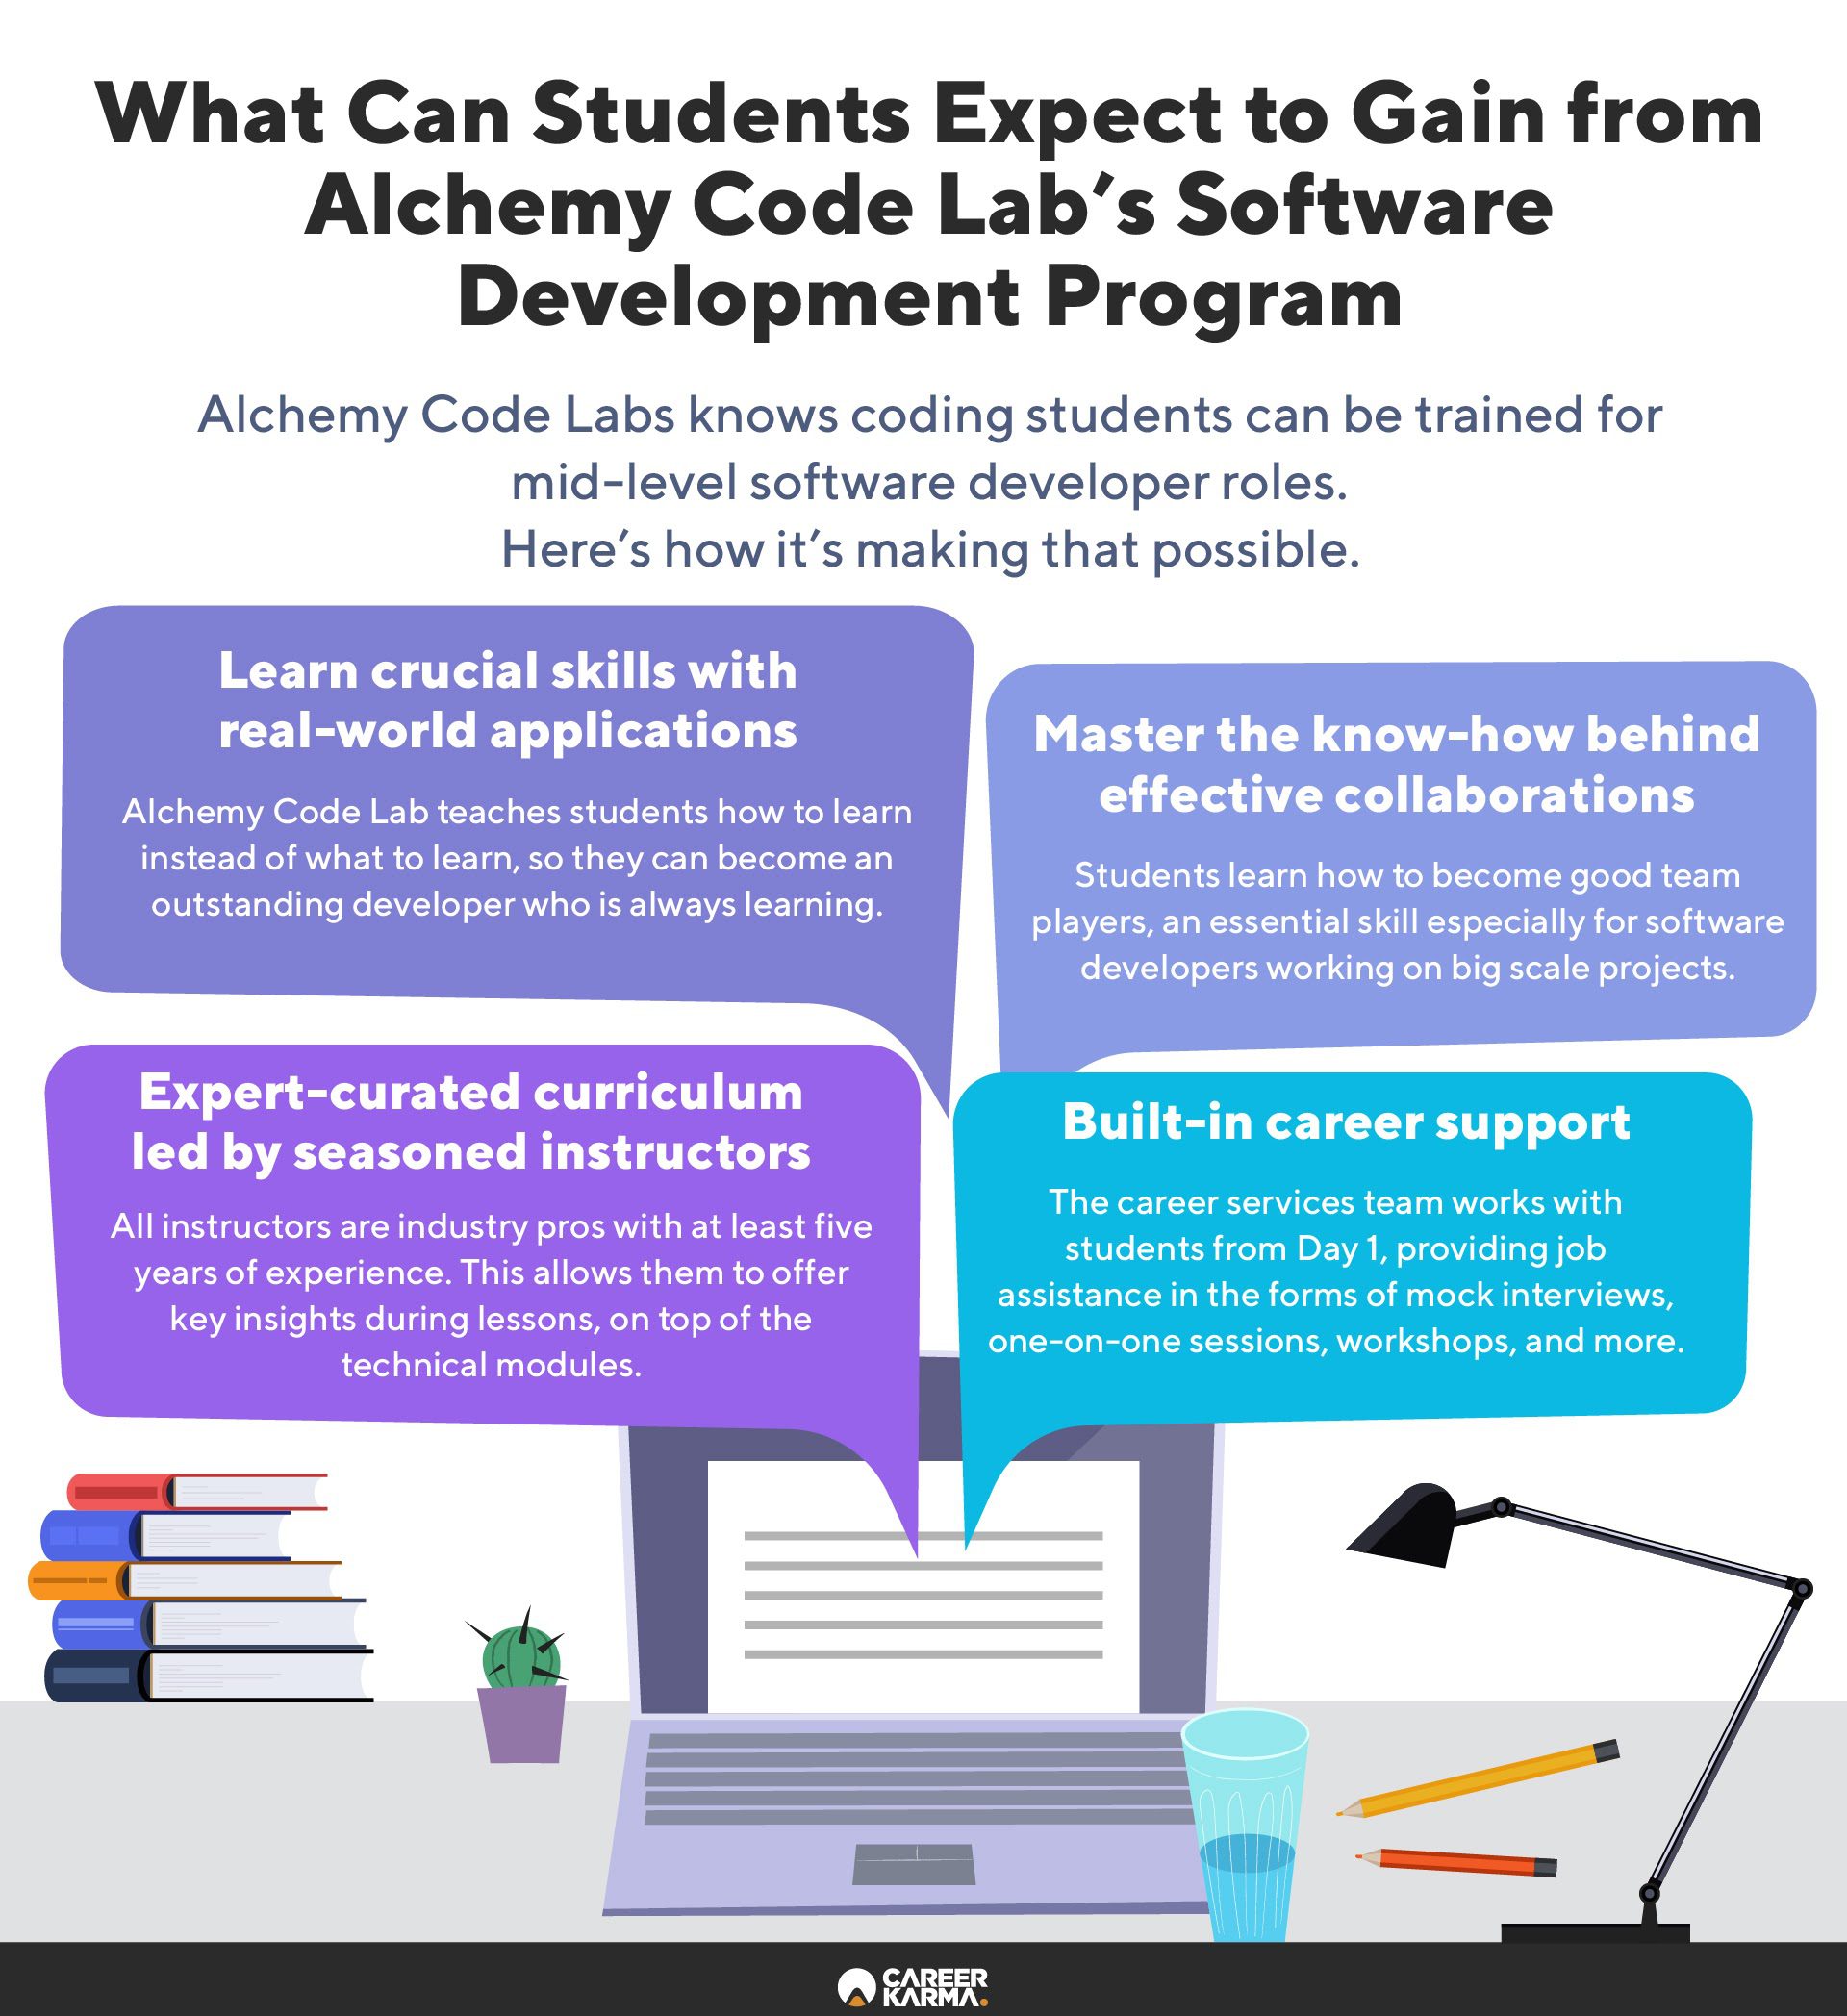 An infographic covering the key features of Alchemy Code Lab’s Software Developer Program